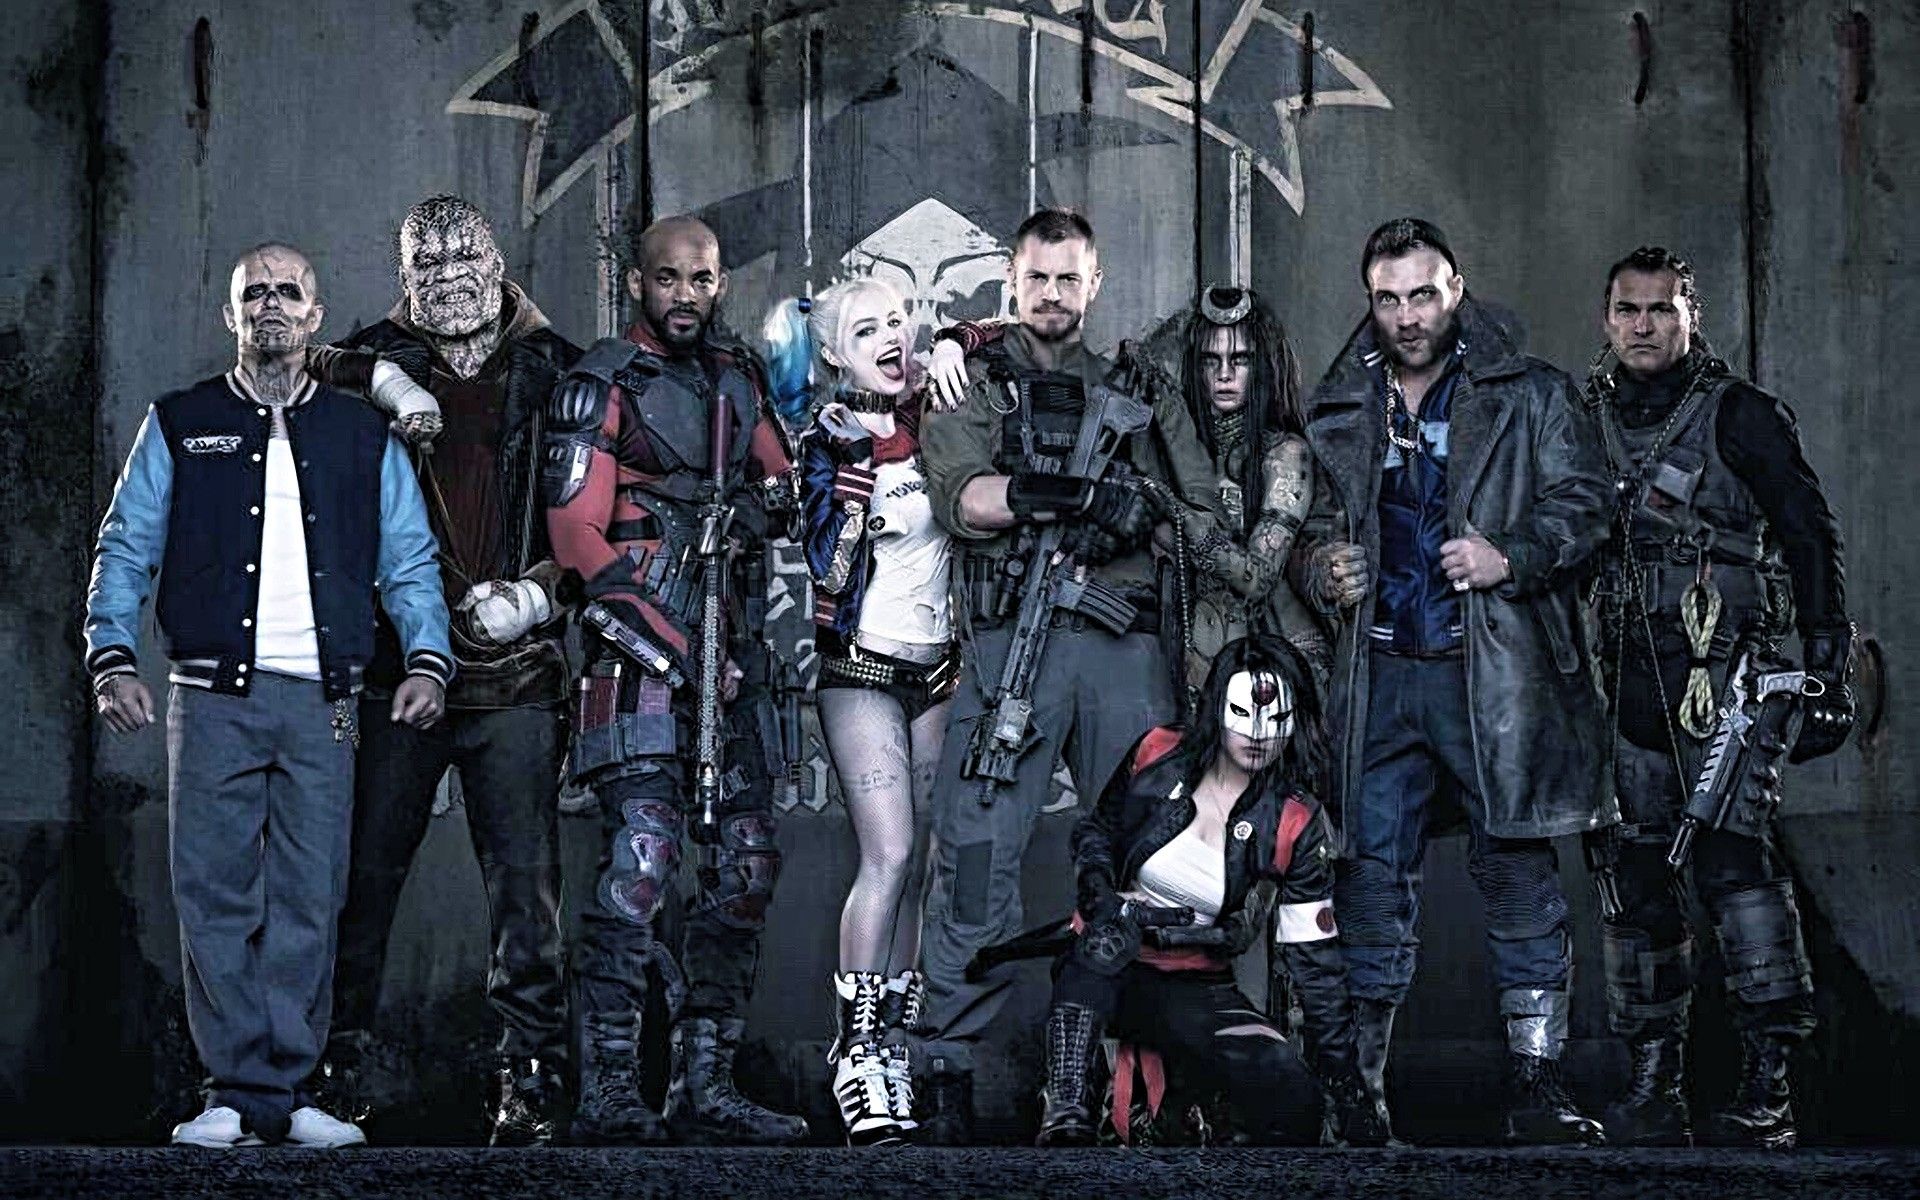 Second Take: 'Batman v Superman', 'Suicide Squad' trailers show DC's faulty mentality